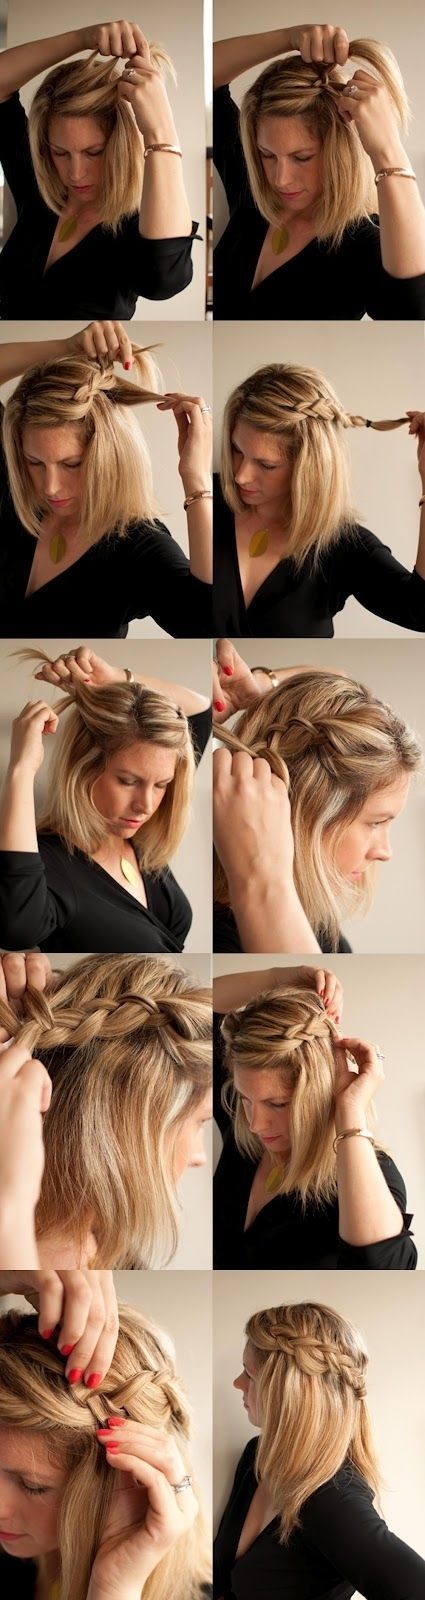 How-To Guide to Hairstyles (27 pics)